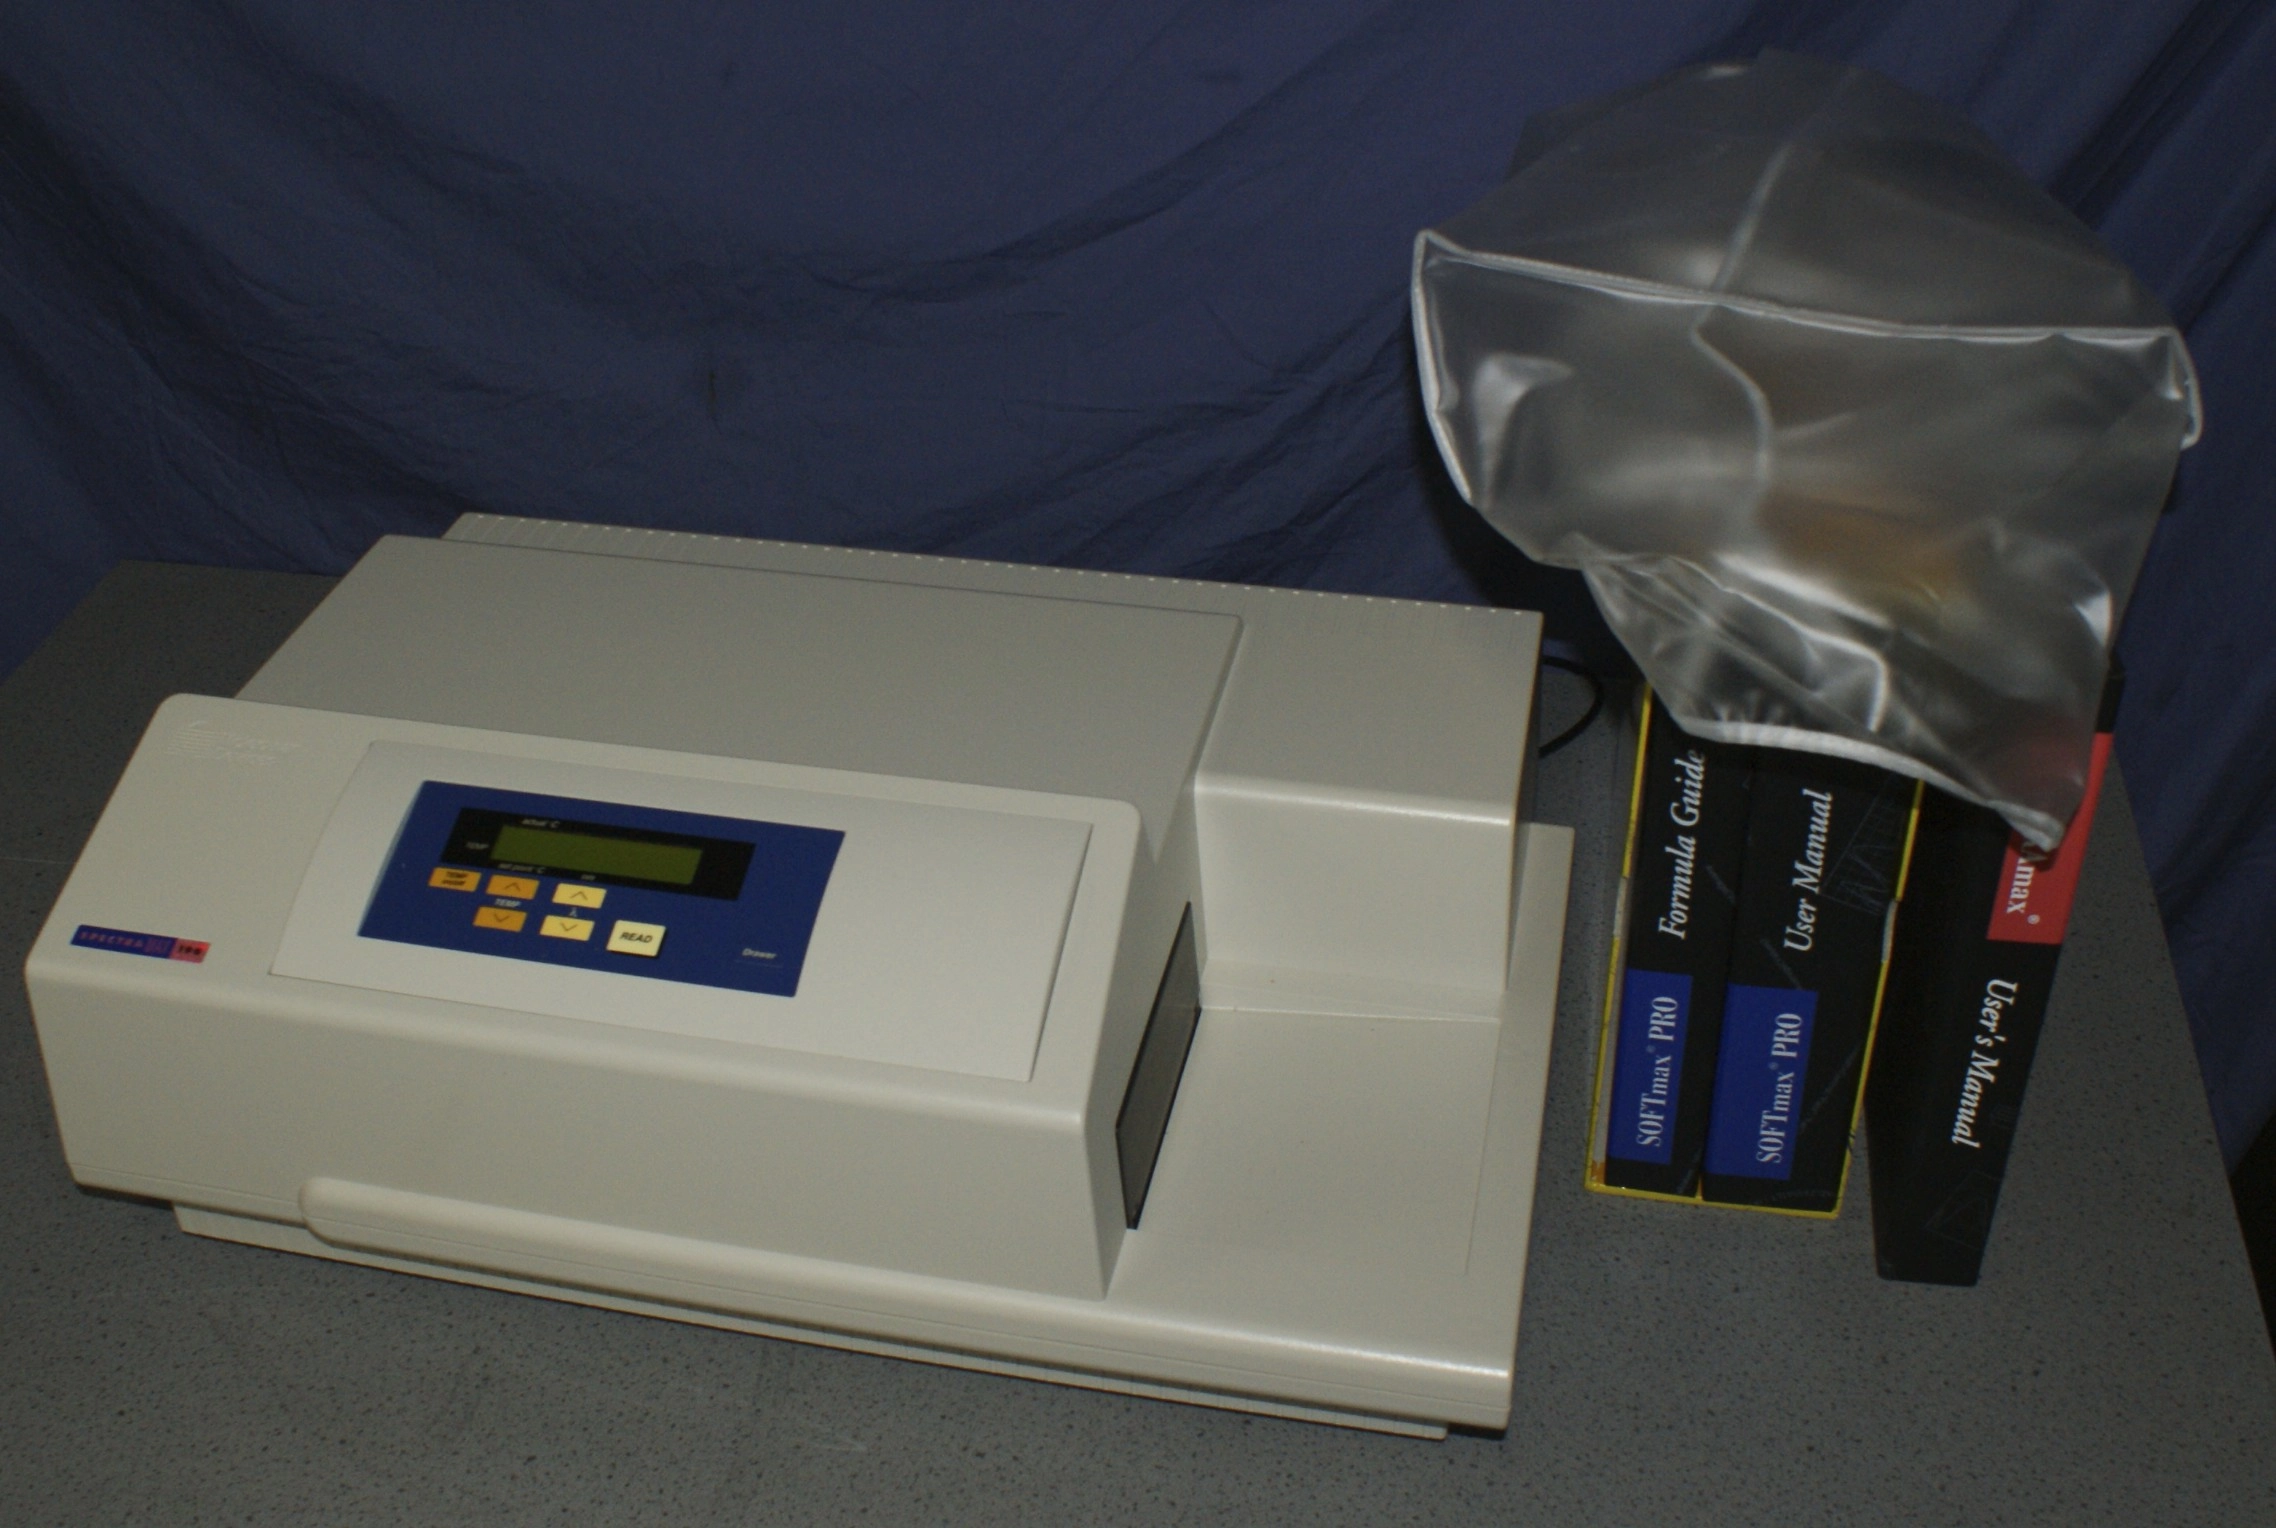 Molecular Devices Spectramax 190 Plate Reader used